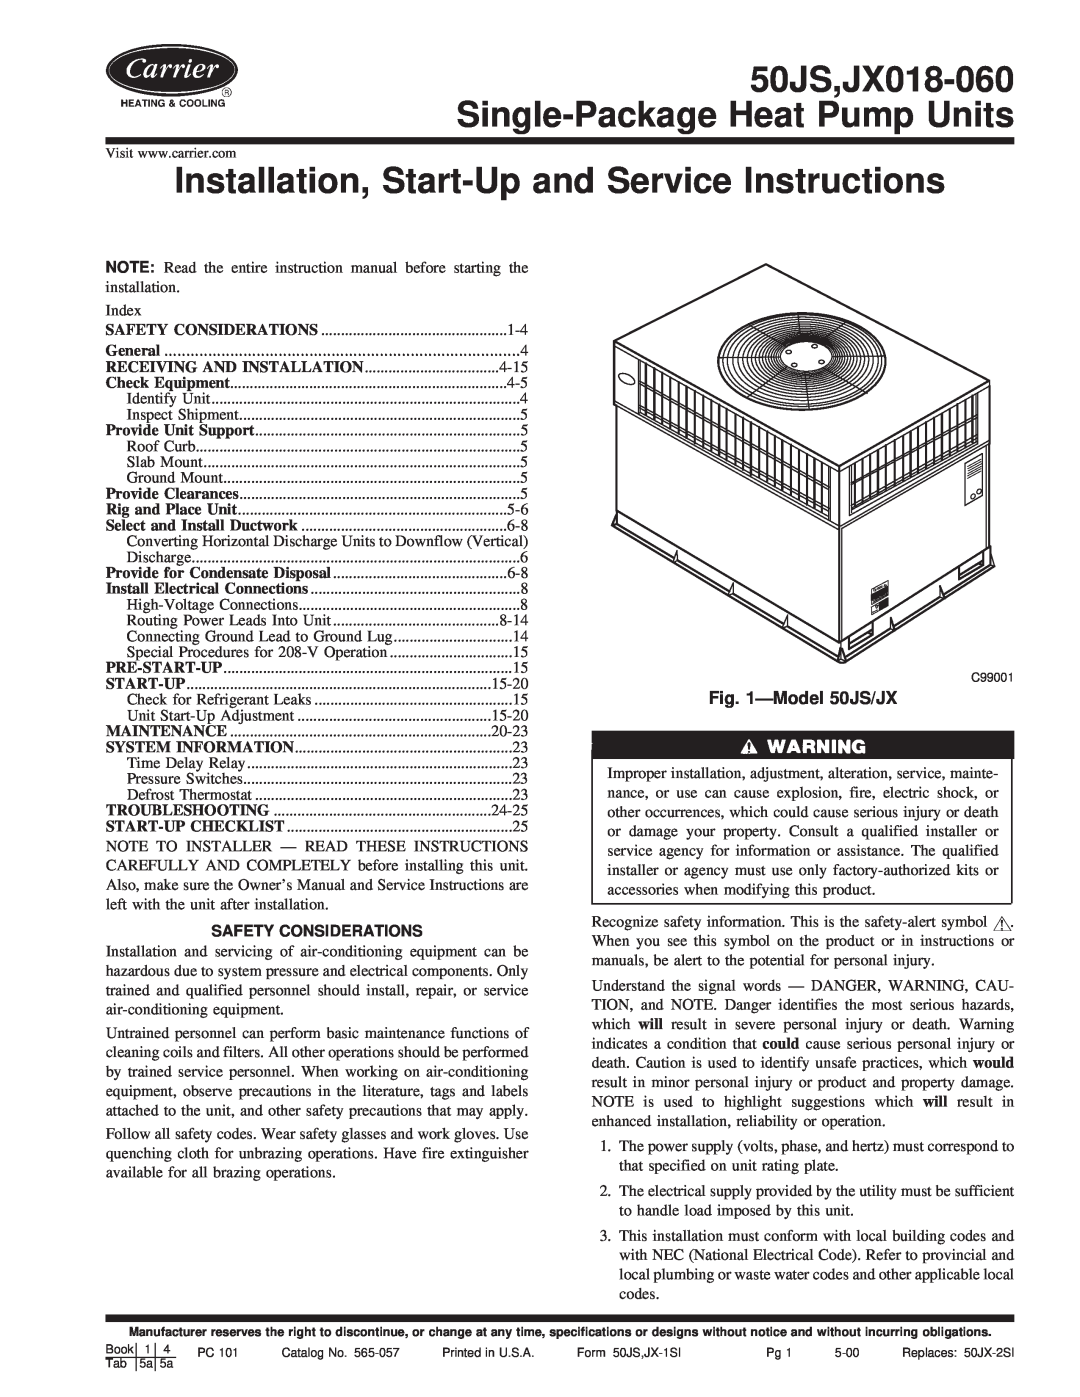 Carrier instruction manual General, ÐModel 50JS/JX, Safety Considerations, 50JS,JX018-060 Single-PackageHeat Pump Units 